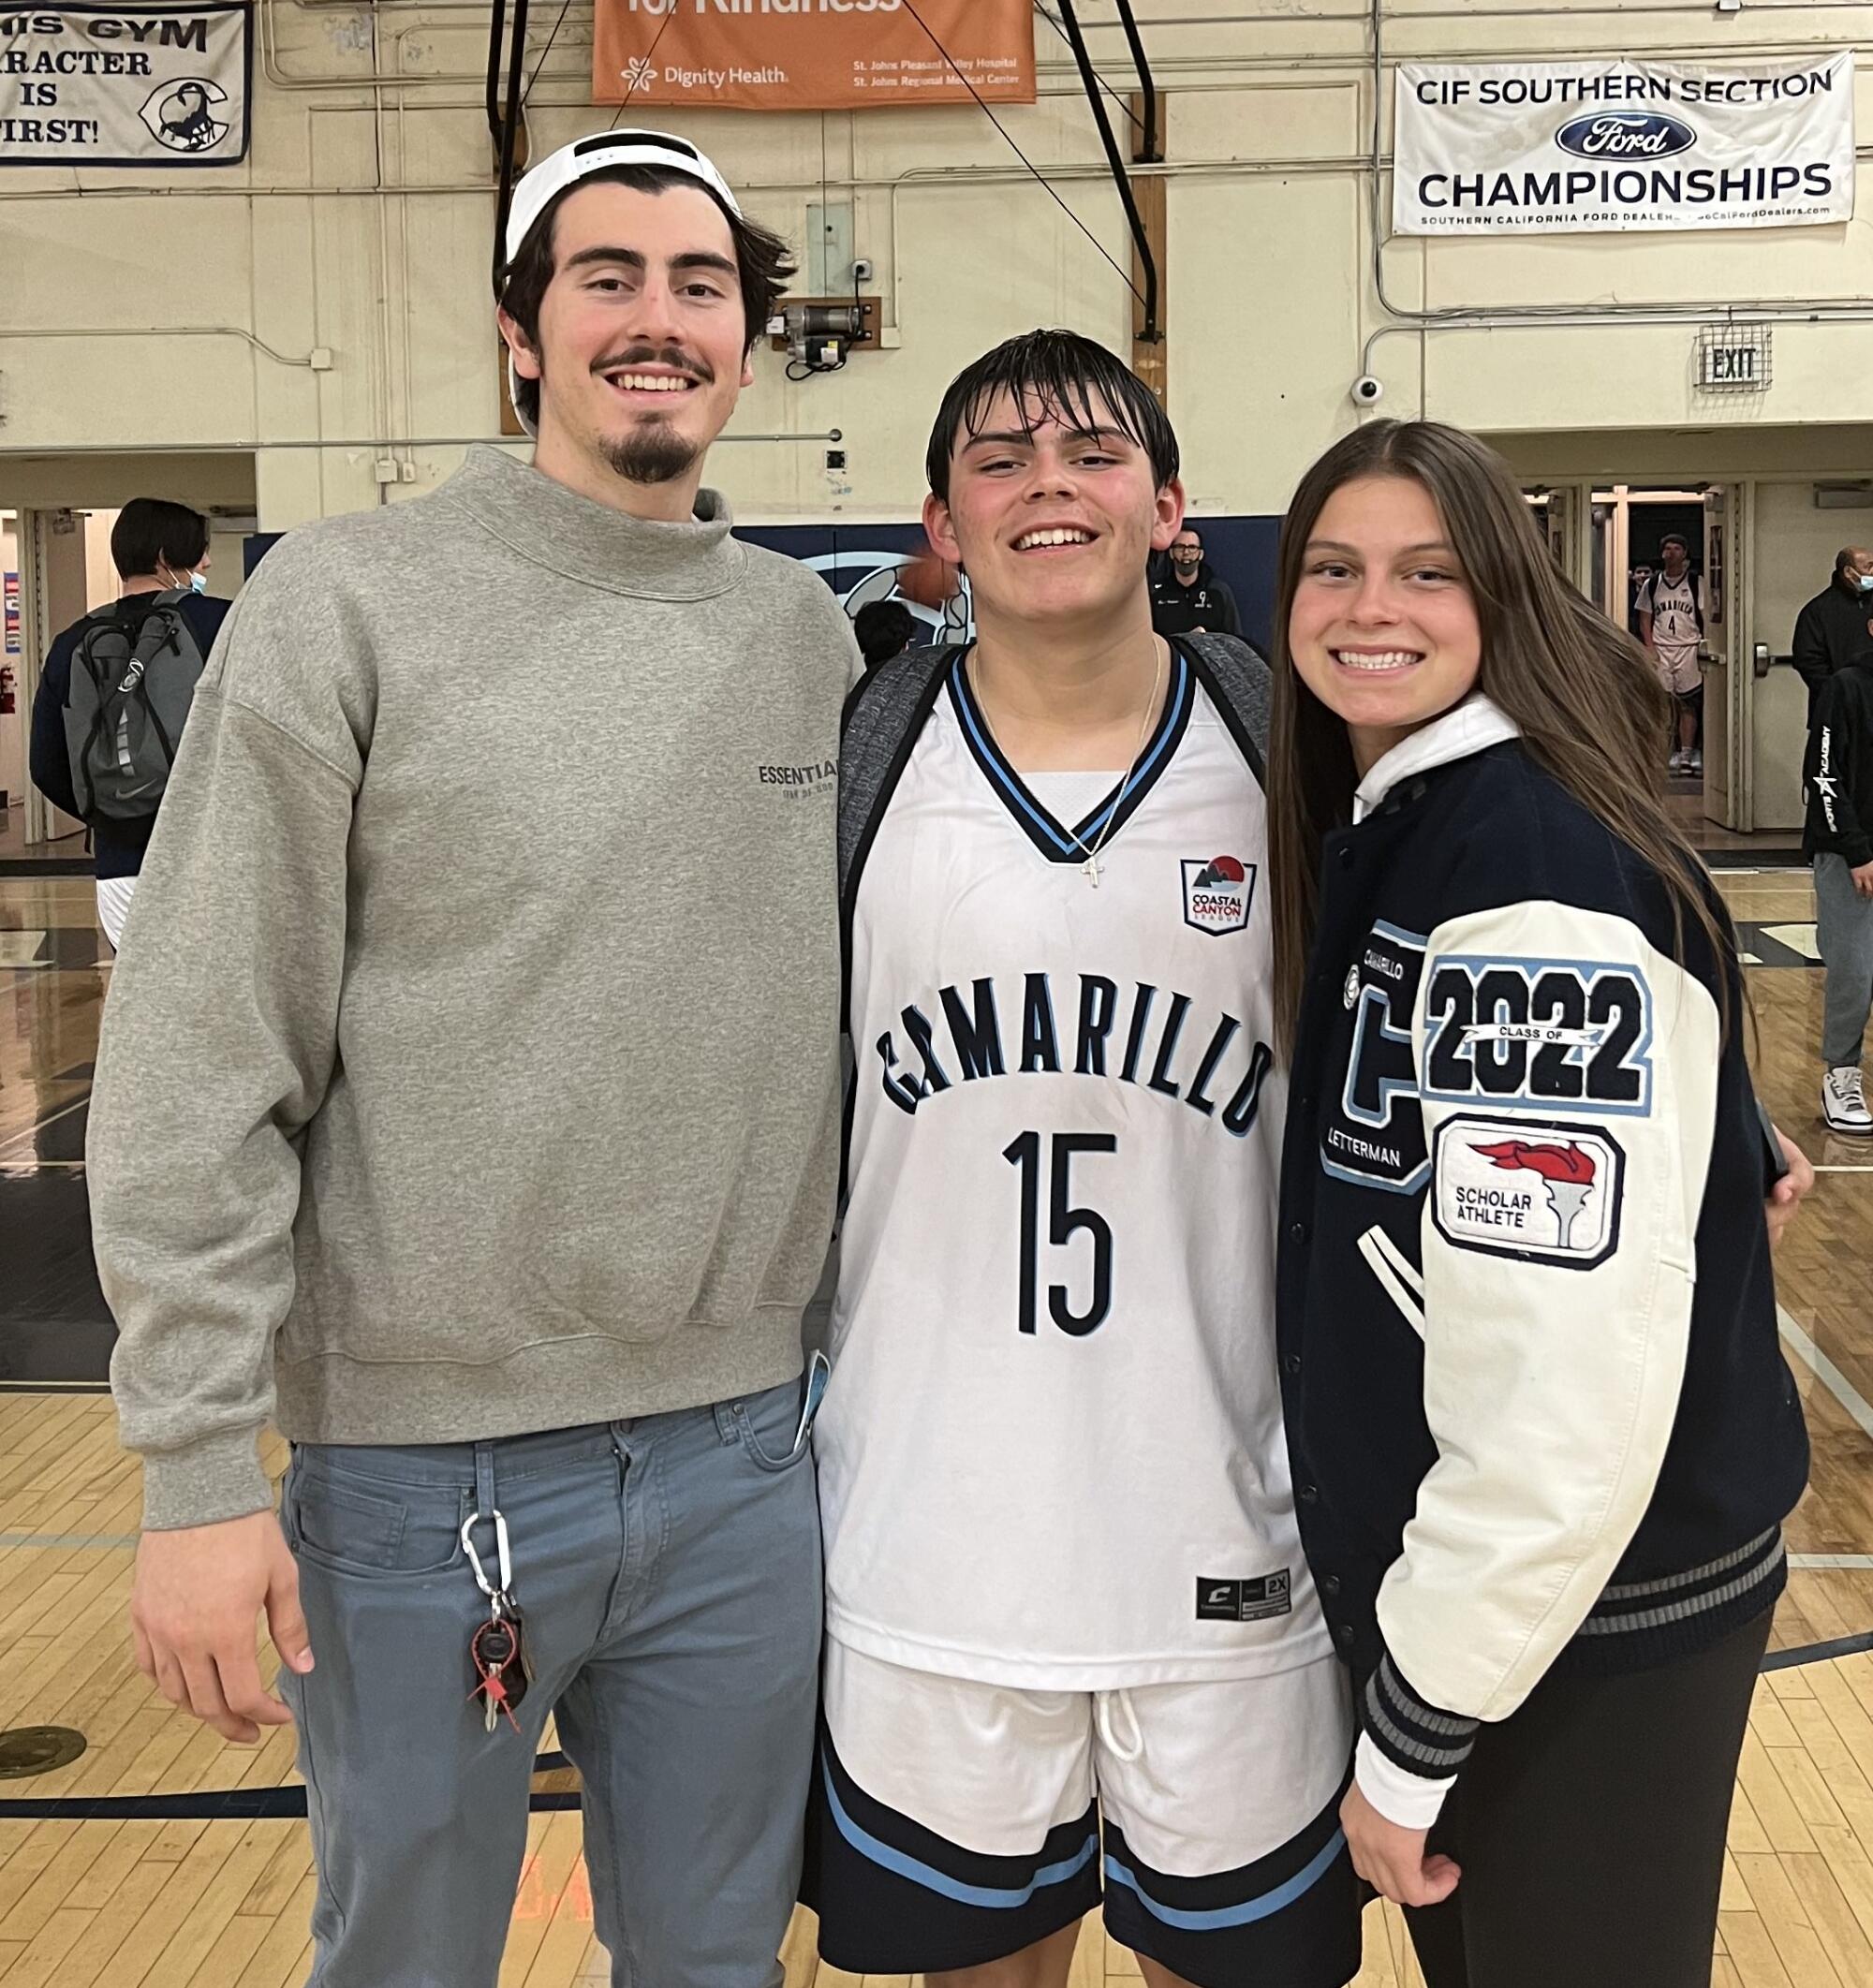 Jaime, left, Marcos and Gabriela Jaquez gather for a photo after one of Marcos' high school basketball games.